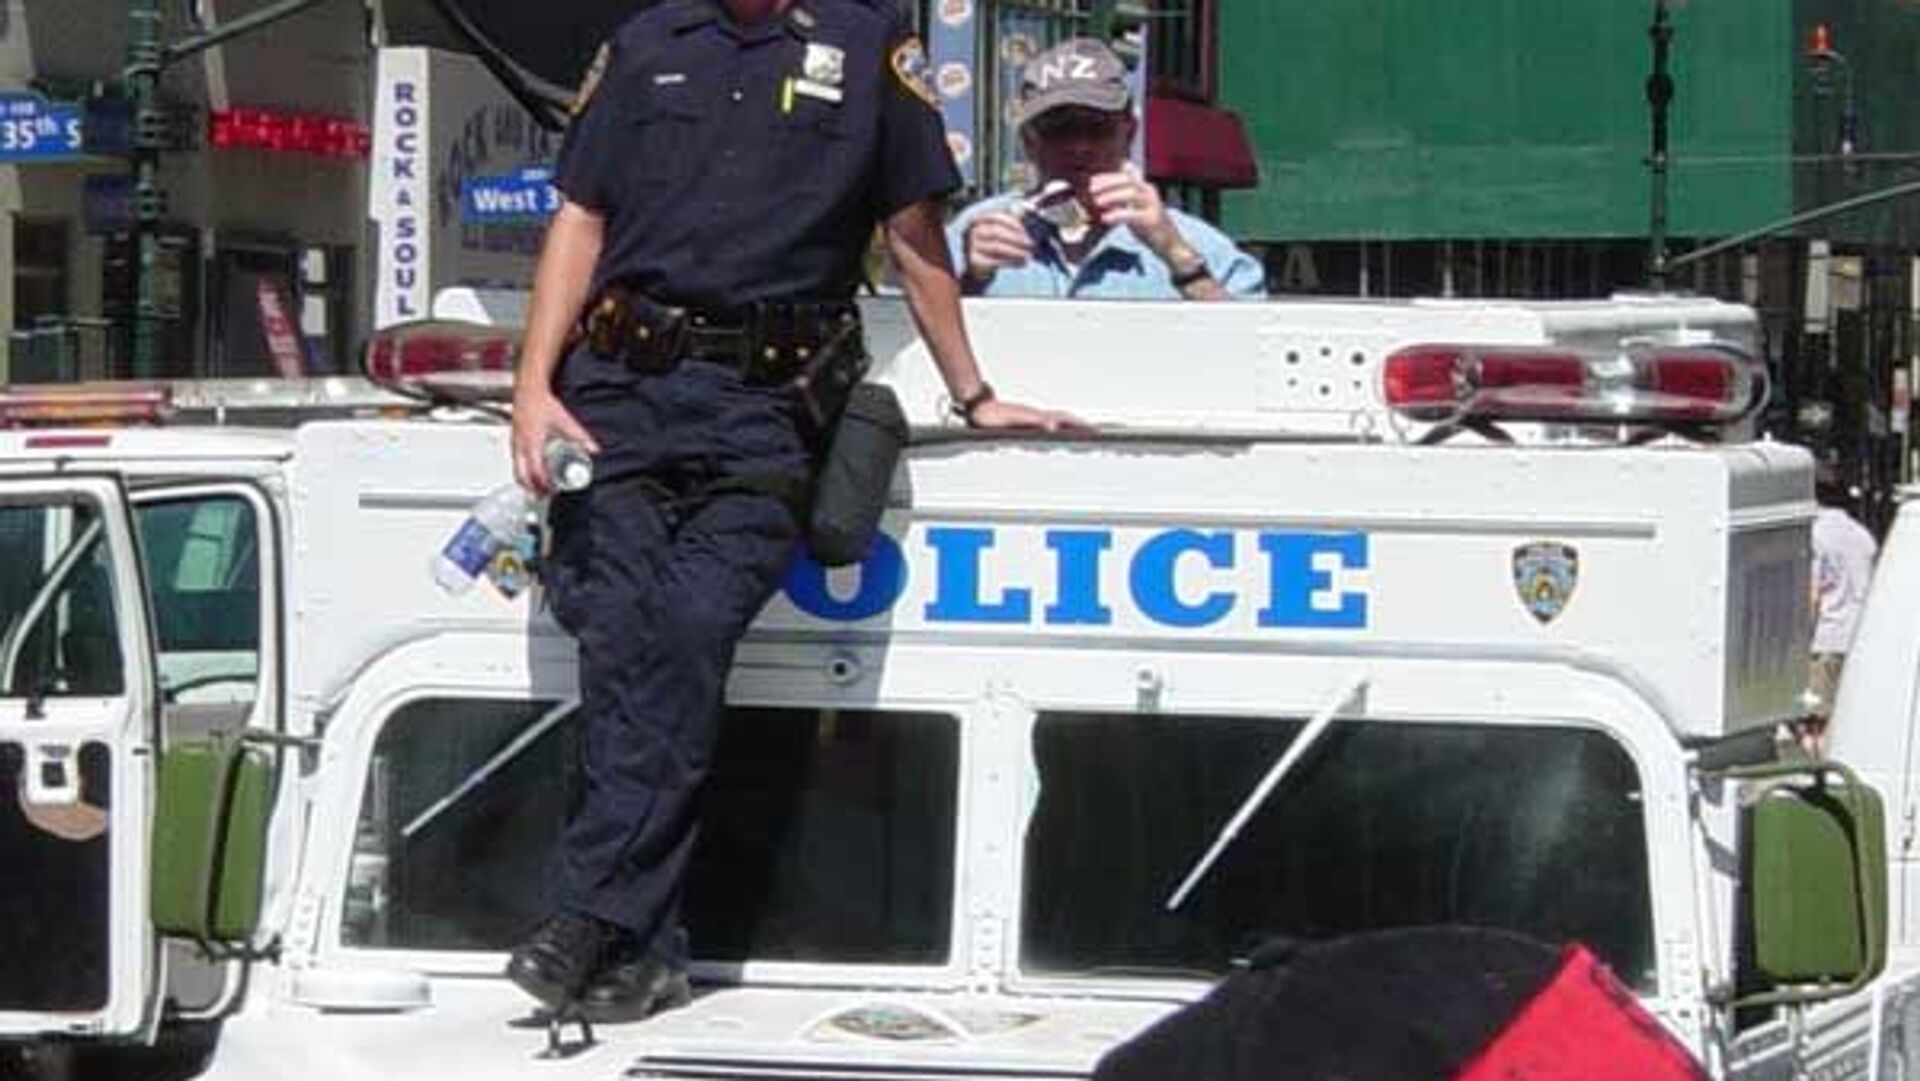 Long Range Acoustic device (LRAD) mounted on New York Police Department (NYPD) vehicle, Republican National Convention, New York City, 2004. - Sputnik International, 1920, 20.06.2022